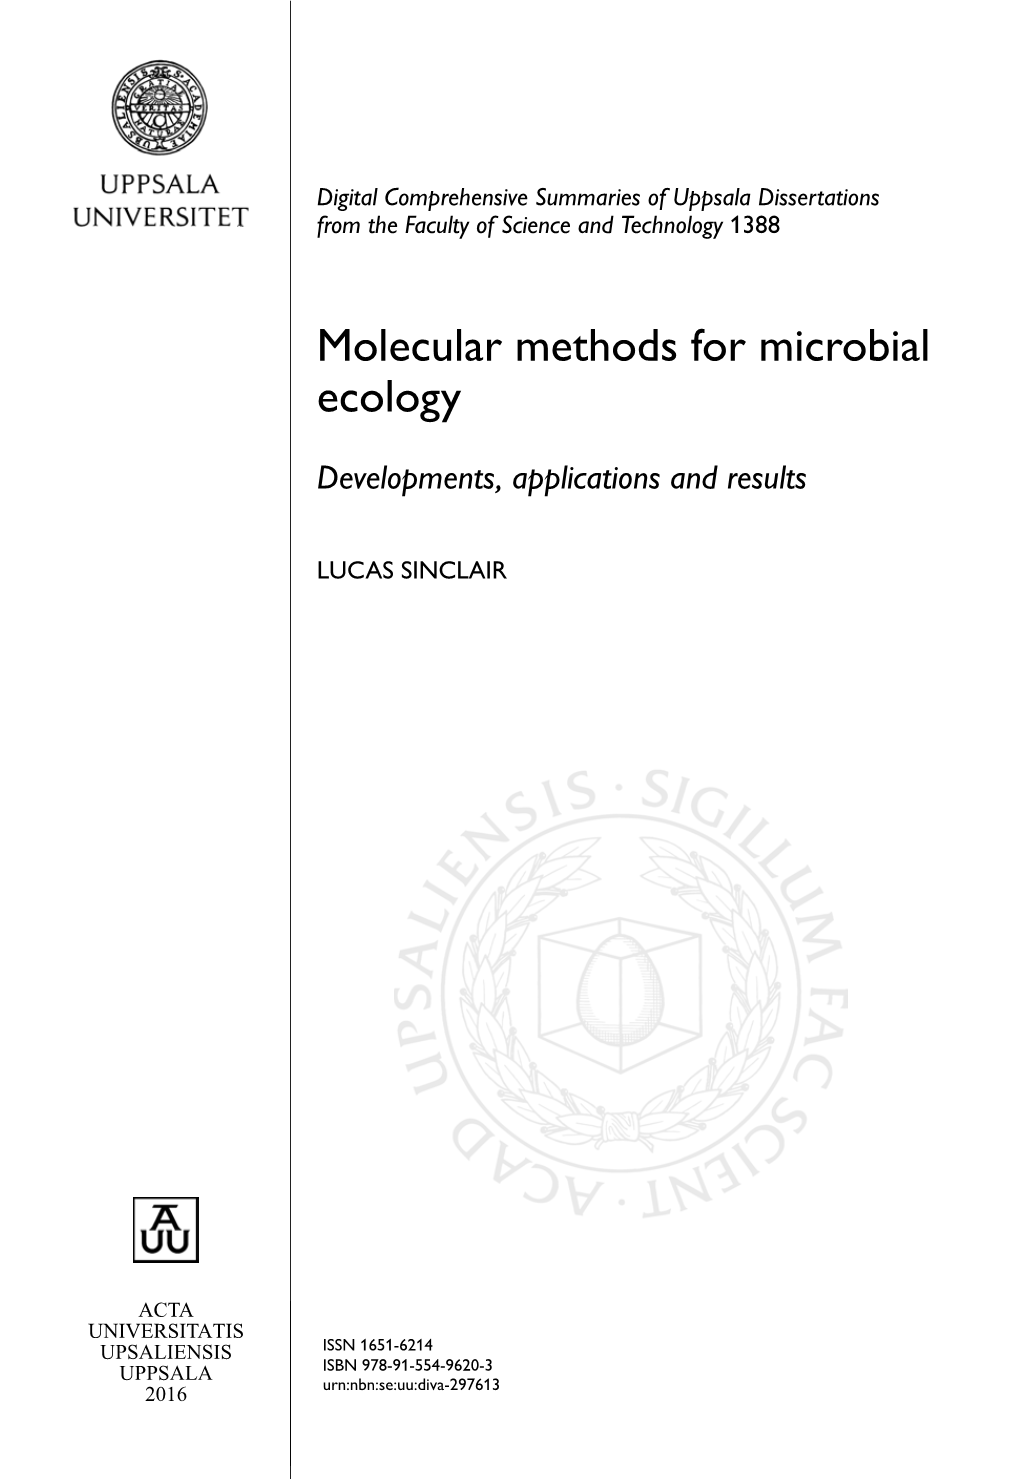 Molecular Methods for Microbial Ecology